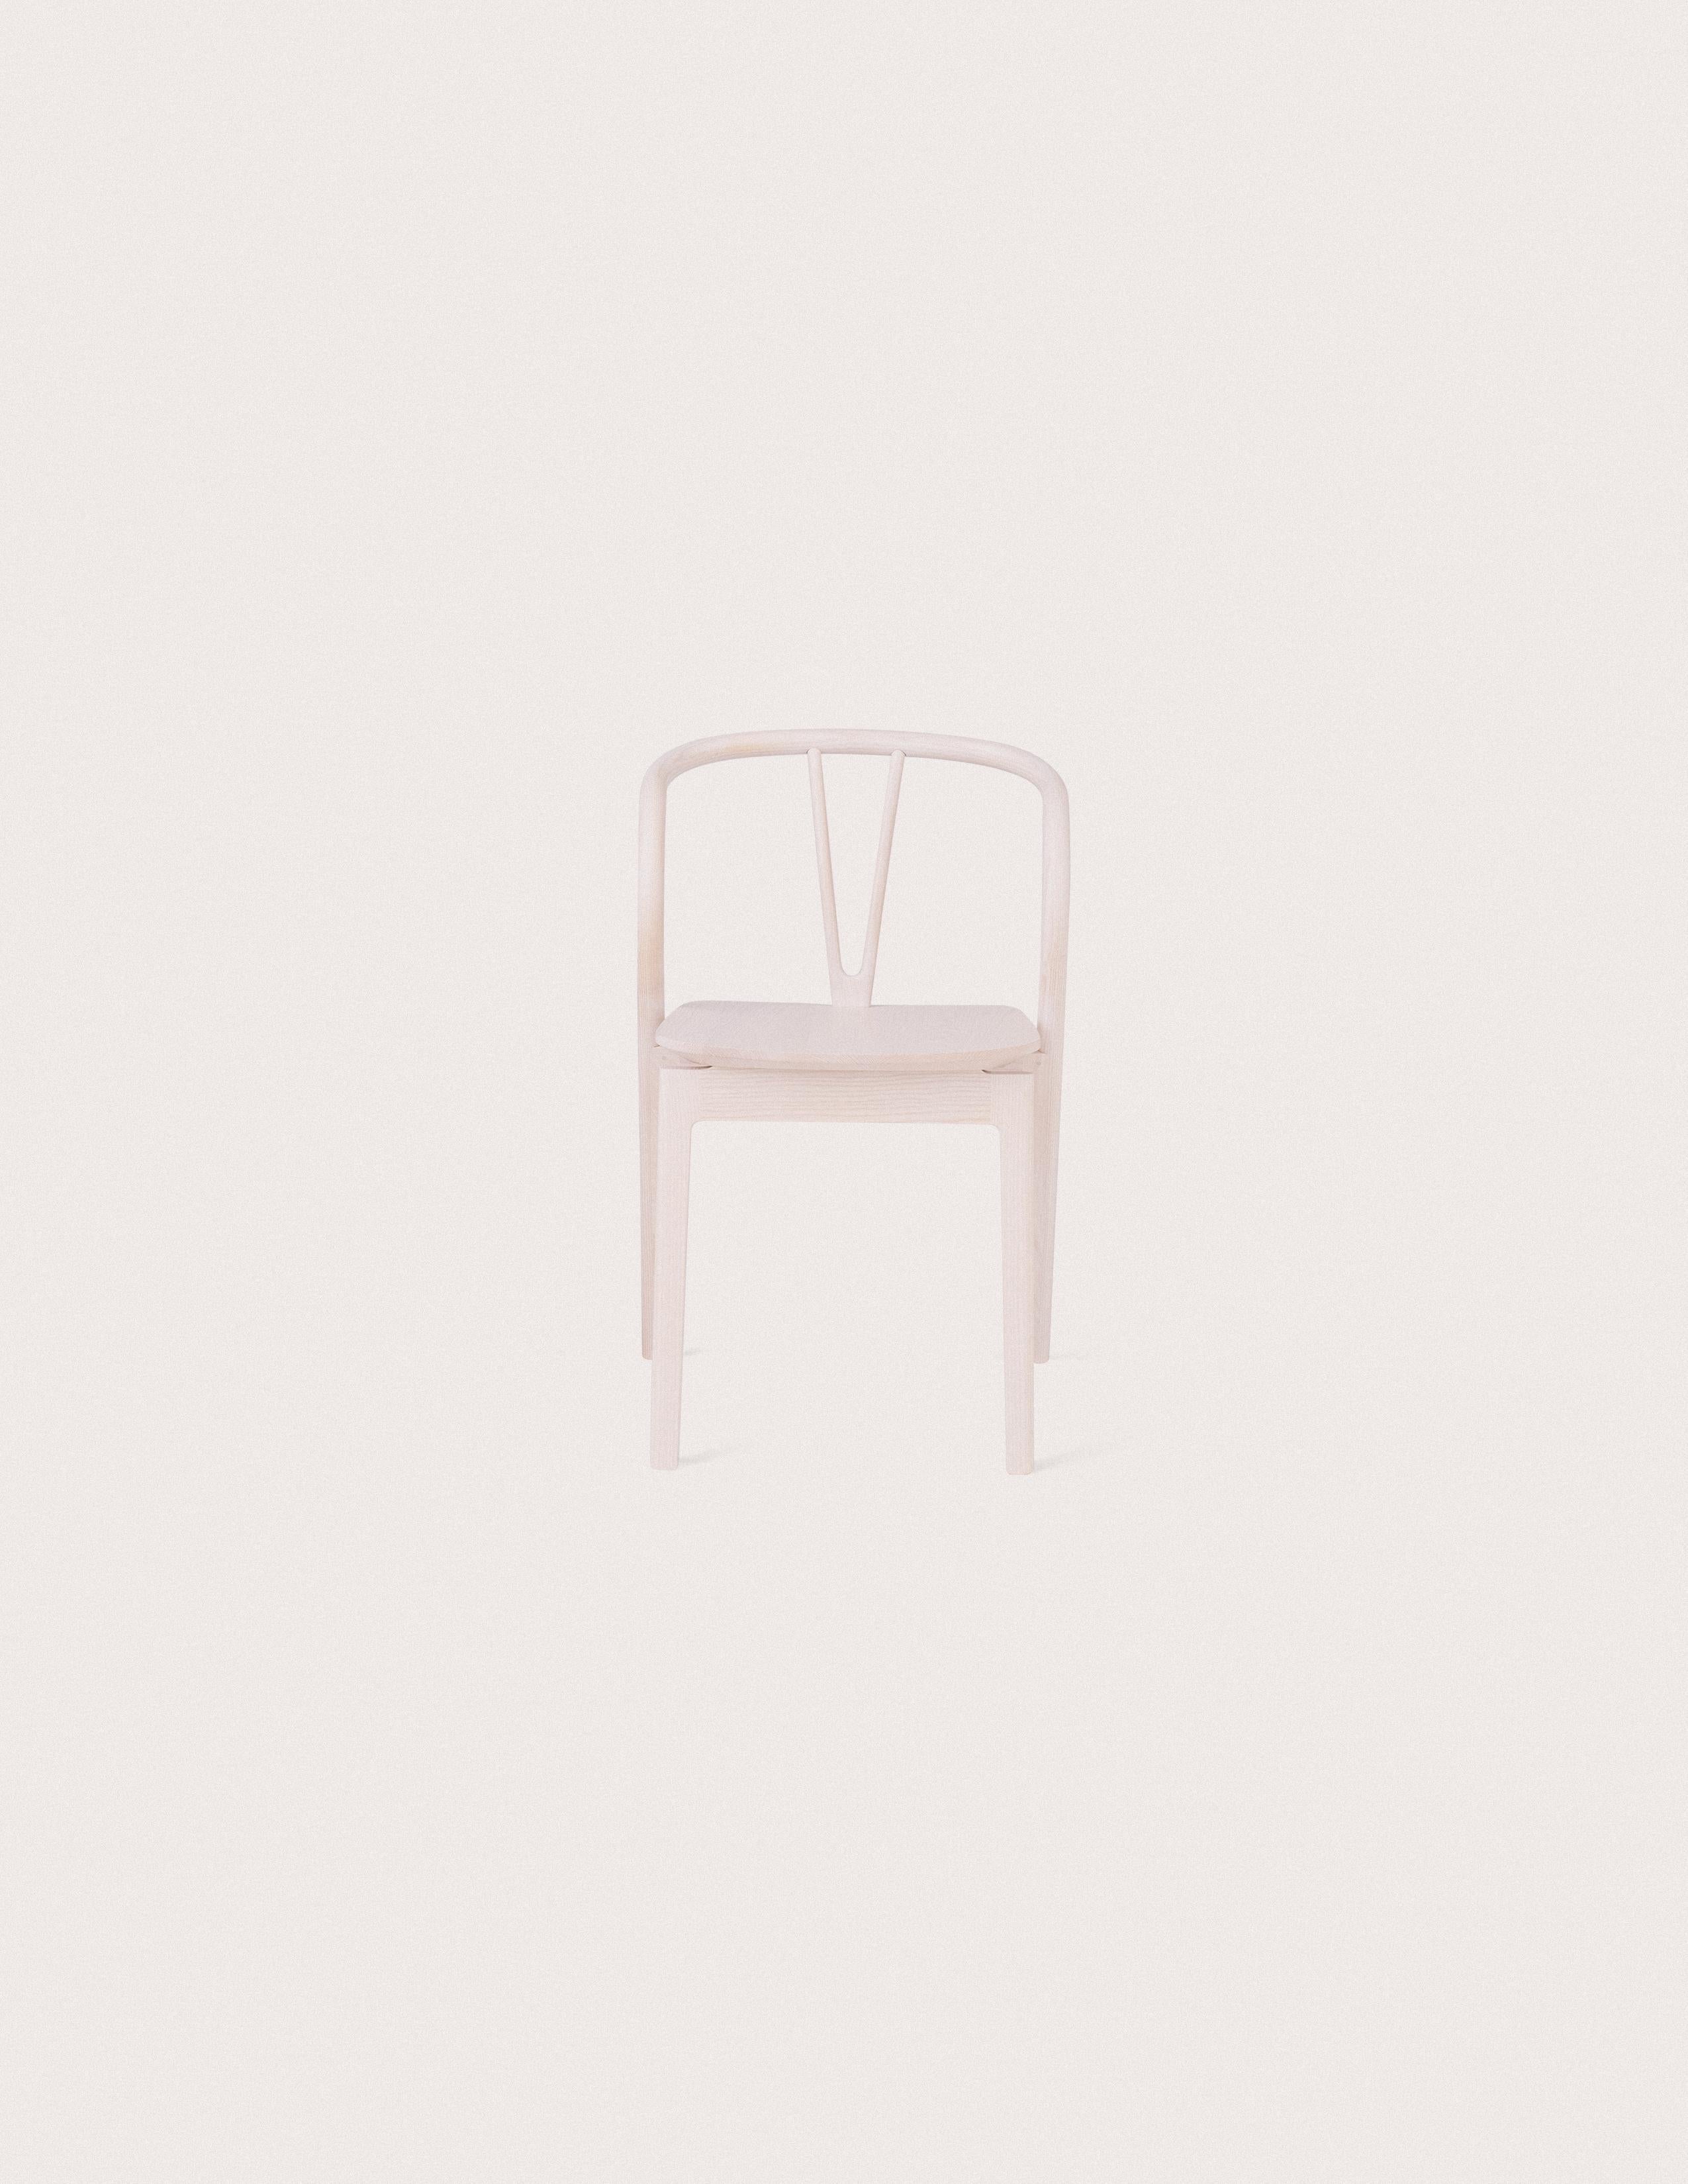 Customizable L.Ercolani Flow Chair by Tomoko Azumi In New Condition For Sale In New York, NY